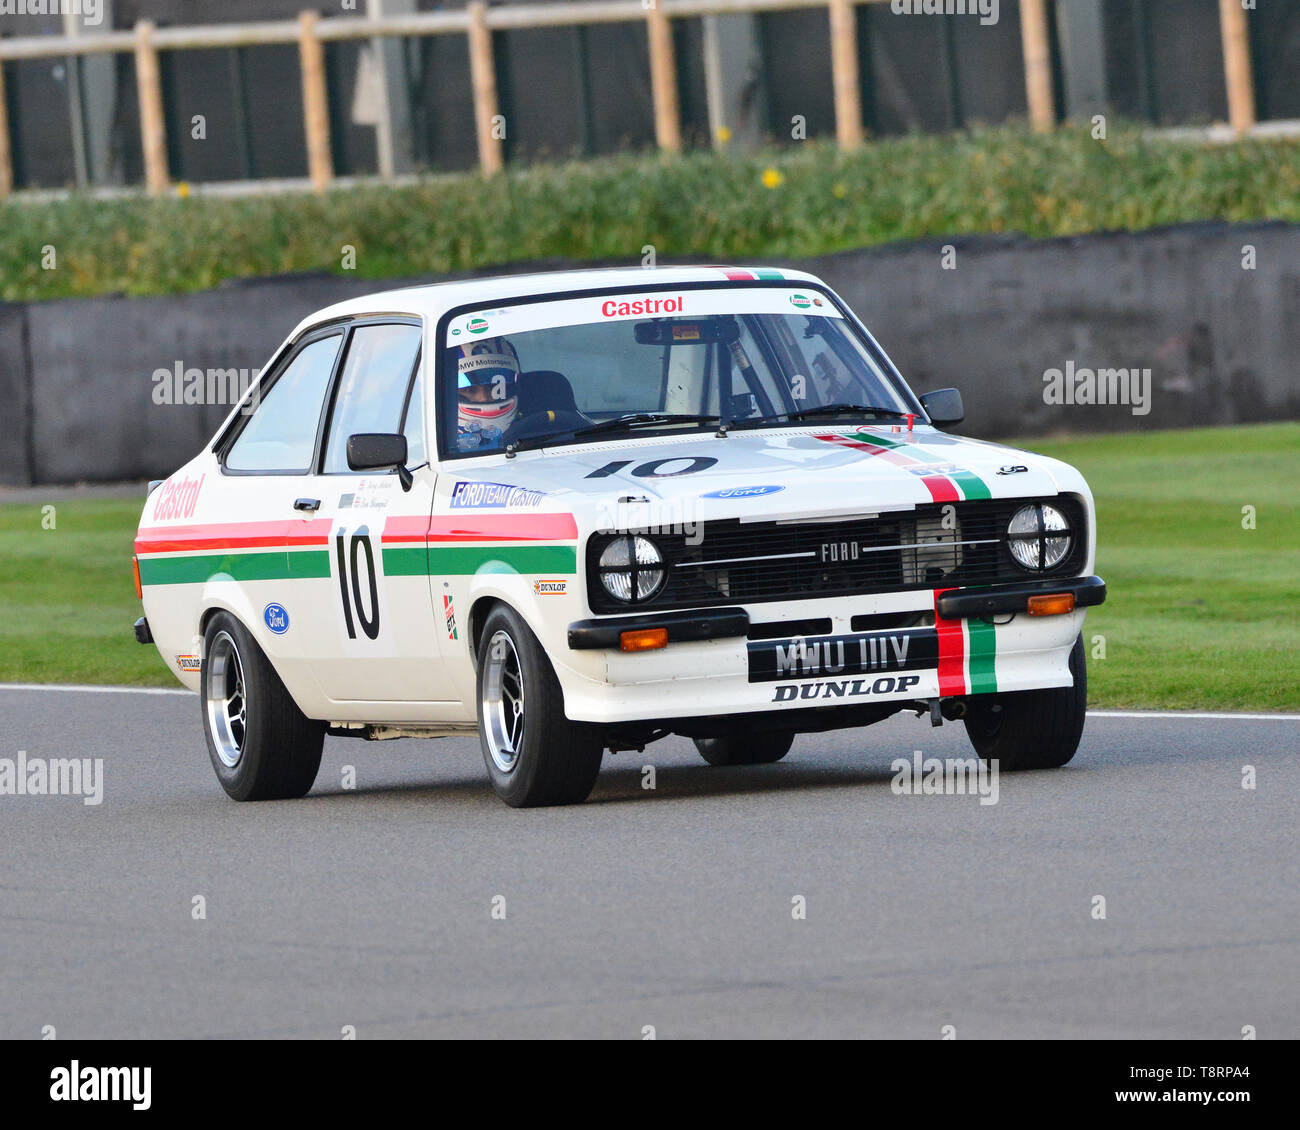 Kerry Michael, Tom Blomqvist, Ford Escort Mk2 RS 2000, Gerry Marshall Trophy, Group 1 Saloon cars, 1970 to 1982, 77th Members Meeting, Goodwood, West  Stock Photo